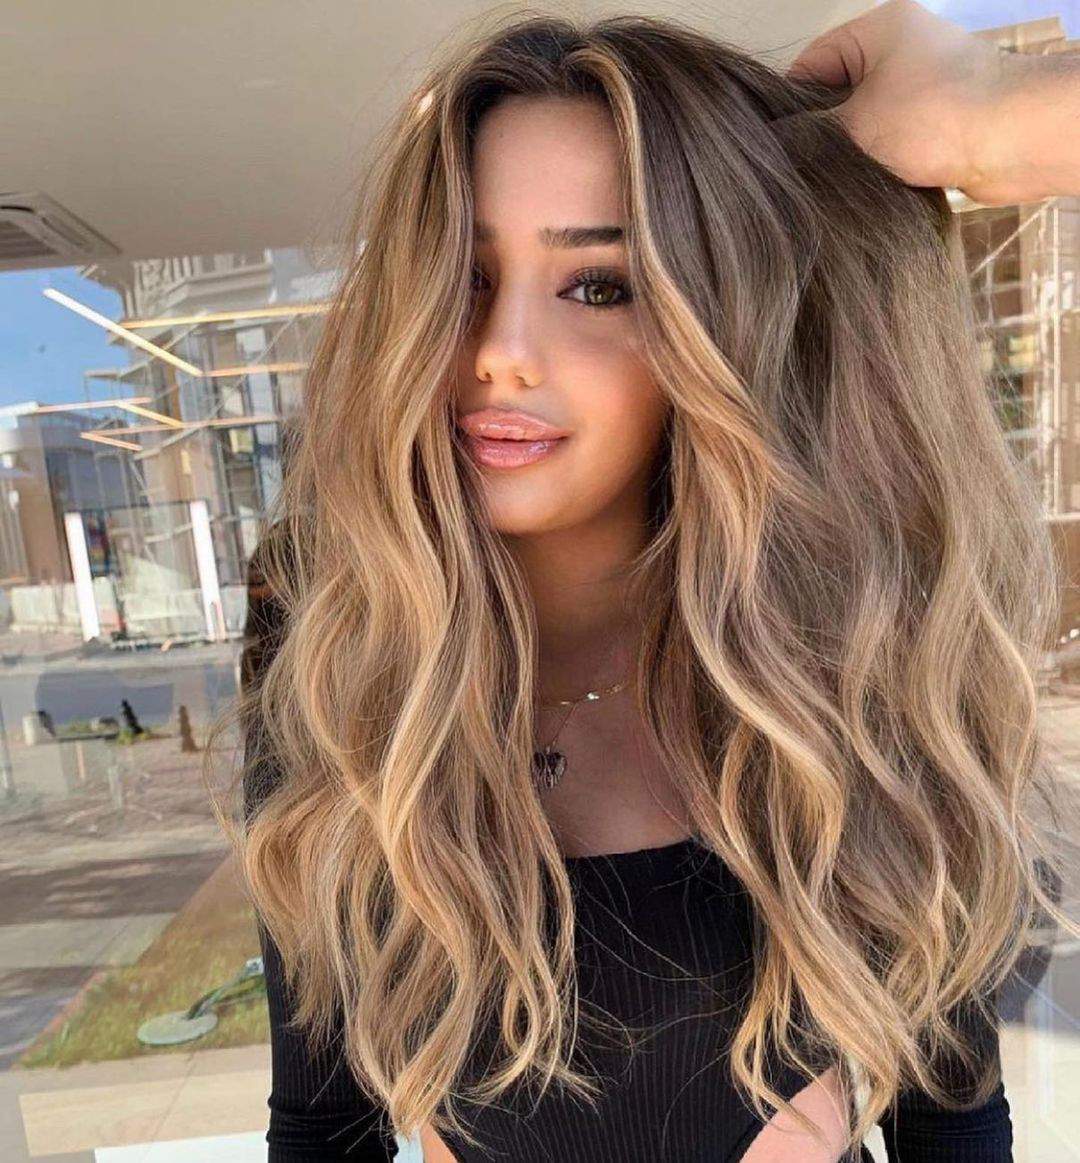 40+ Awesome Hairstyles For Girls With Long Hair images 6